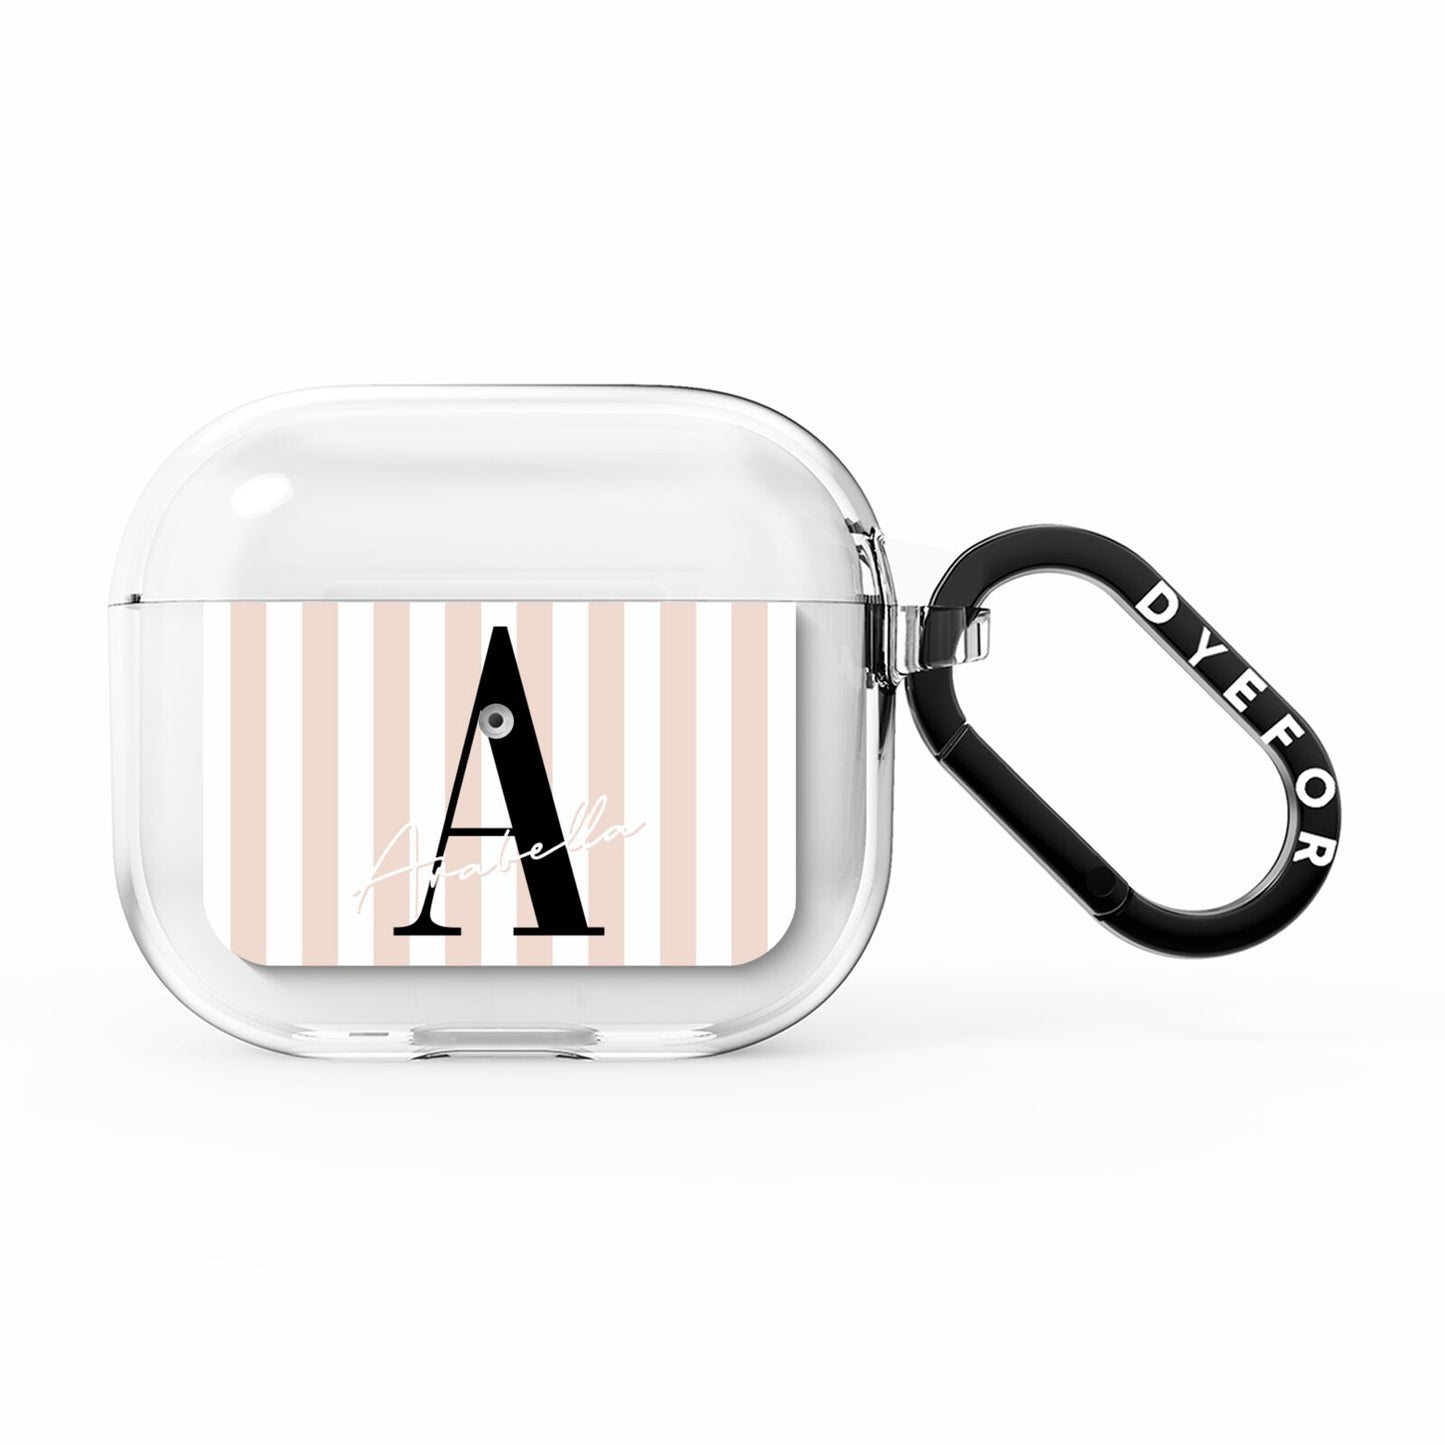 Personalised Nude Colour White Striped AirPods Clear Case 3rd Gen